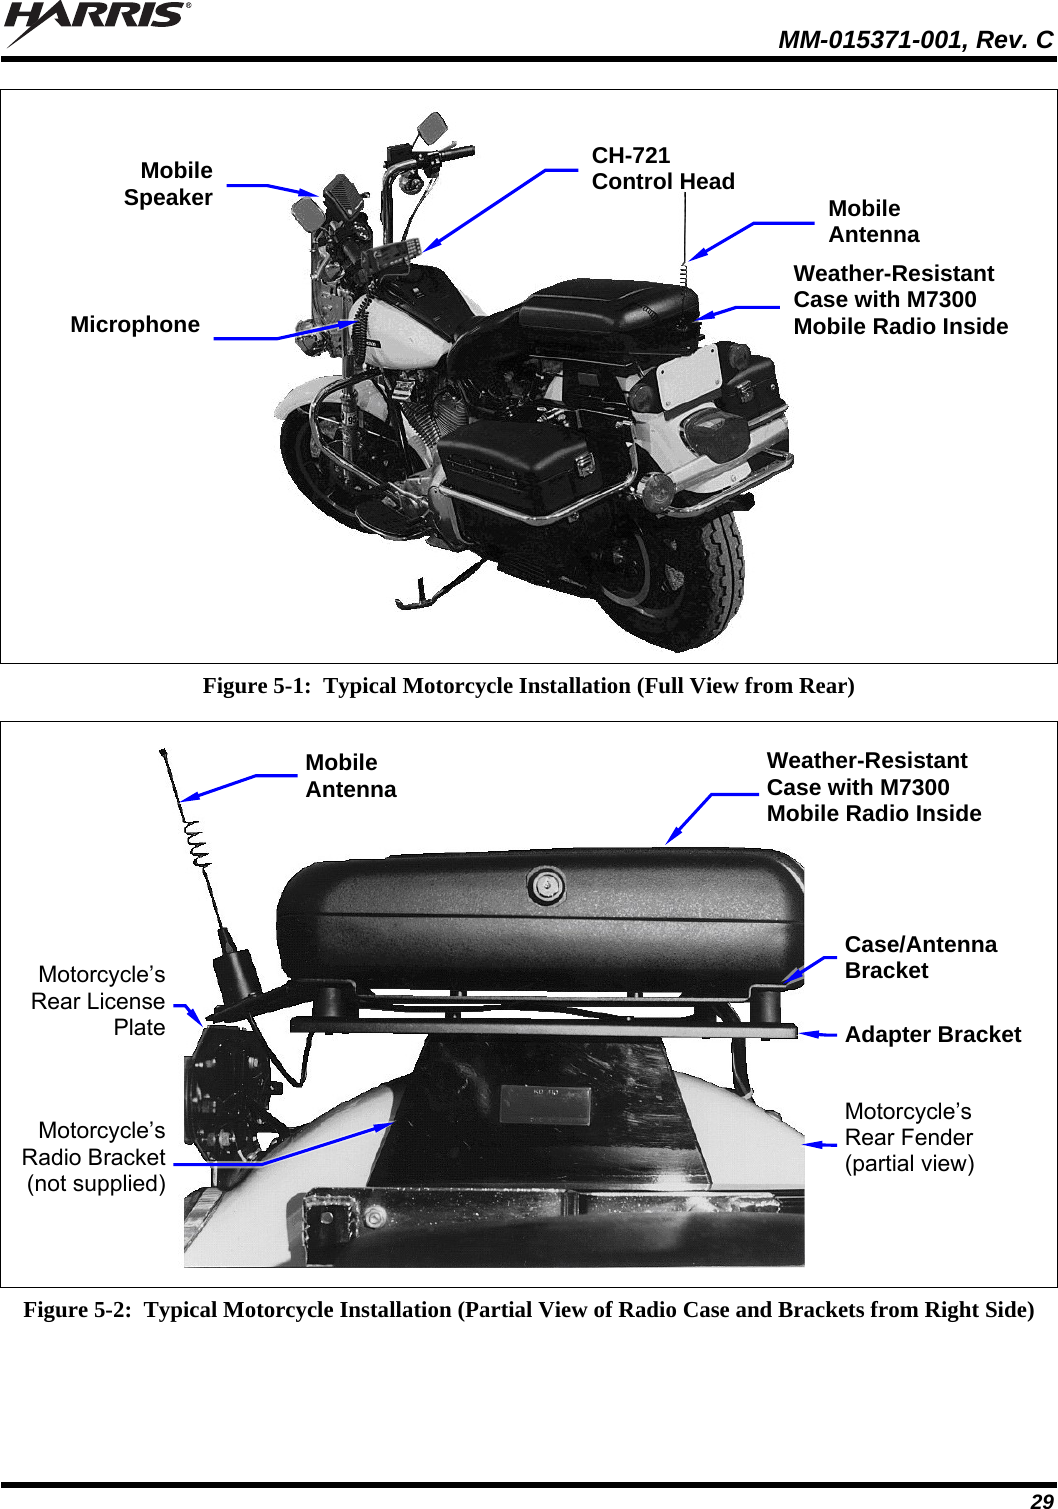   MM-015371-001, Rev. C 29  Figure 5-1:  Typical Motorcycle Installation (Full View from Rear)   Figure 5-2:  Typical Motorcycle Installation (Partial View of Radio Case and Brackets from Right Side)  Mobile Antenna CH-721 Control HeadMobile SpeakerWeather-Resistant Case with M7300 Mobile Radio Inside MicrophoneMobile Antenna Weather-Resistant Case with M7300 Mobile Radio Inside Motorcycle’s Rear License PlateMotorcycle’s Rear Fender (partial view) Adapter Bracket Case/Antenna Bracket Motorcycle’s Radio Bracket (not supplied)